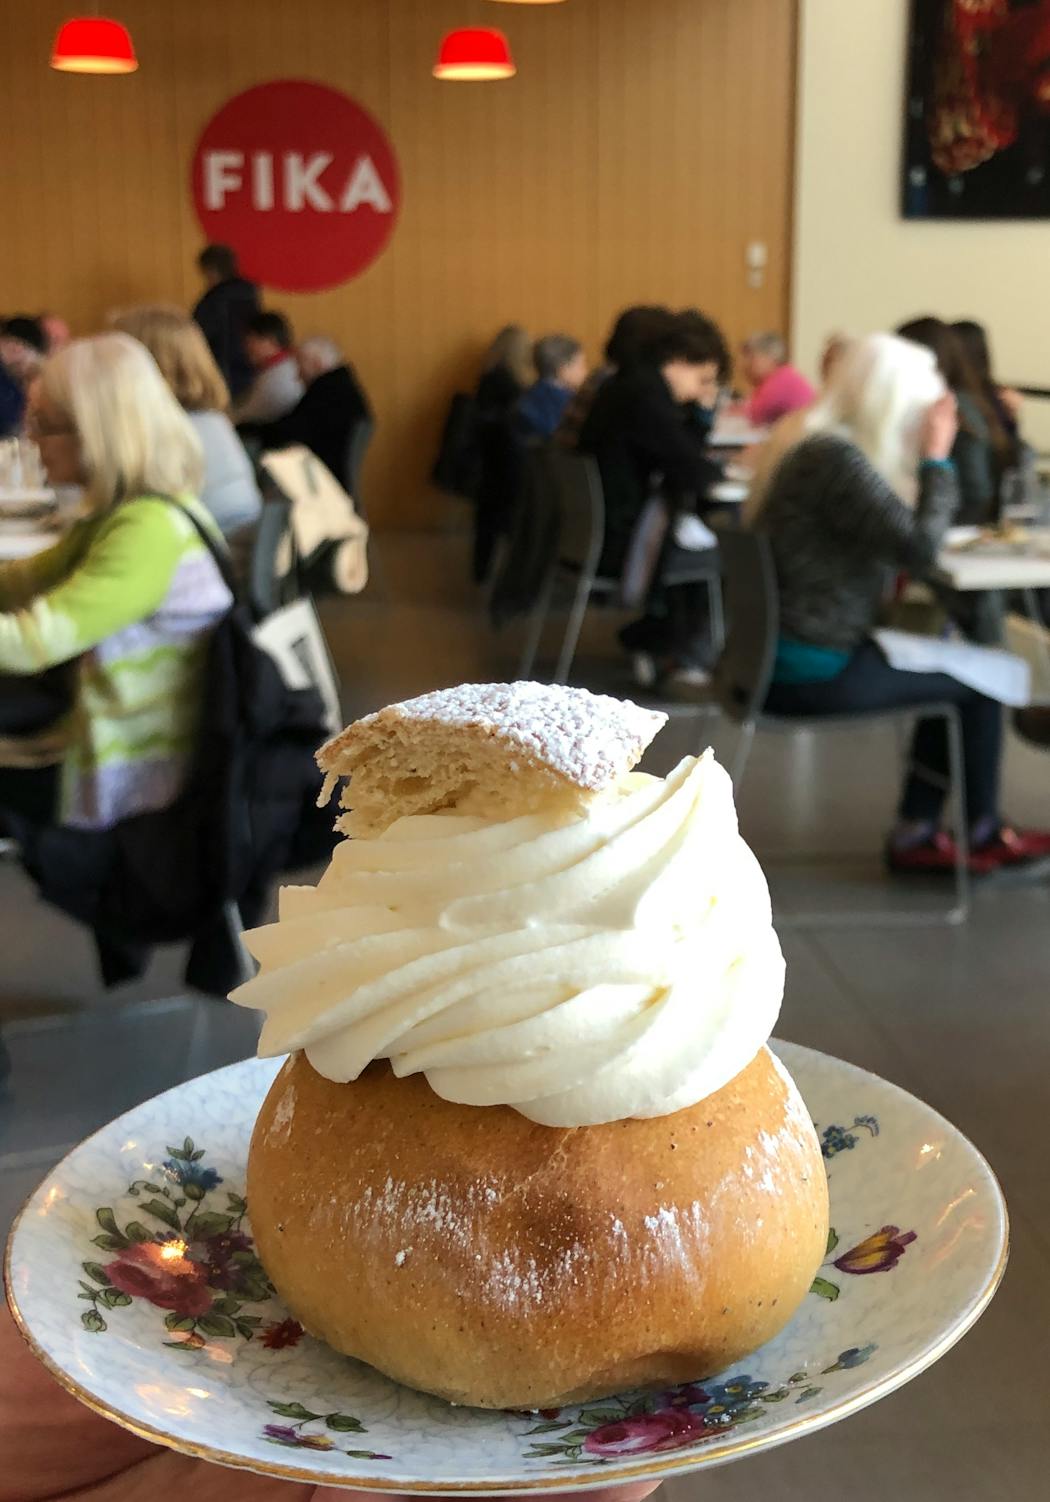 The semla at Fika, the cafe inside the American Swedish Institute, is available until Easter.